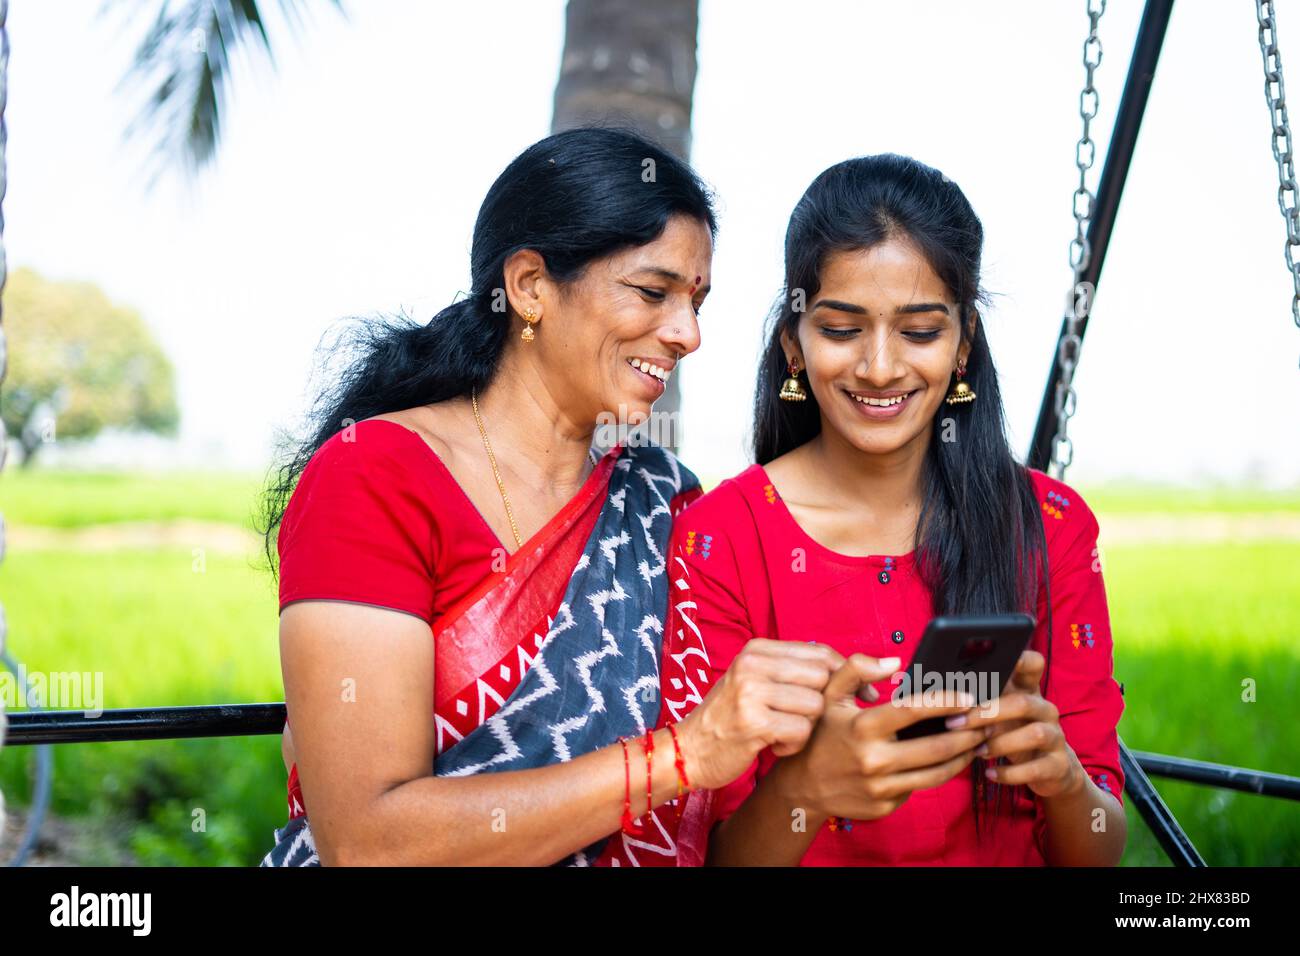 Relaxed mother and daughter on swing using mobile phone - concept of happiness, bonding, using social media and Indian family Stock Photo